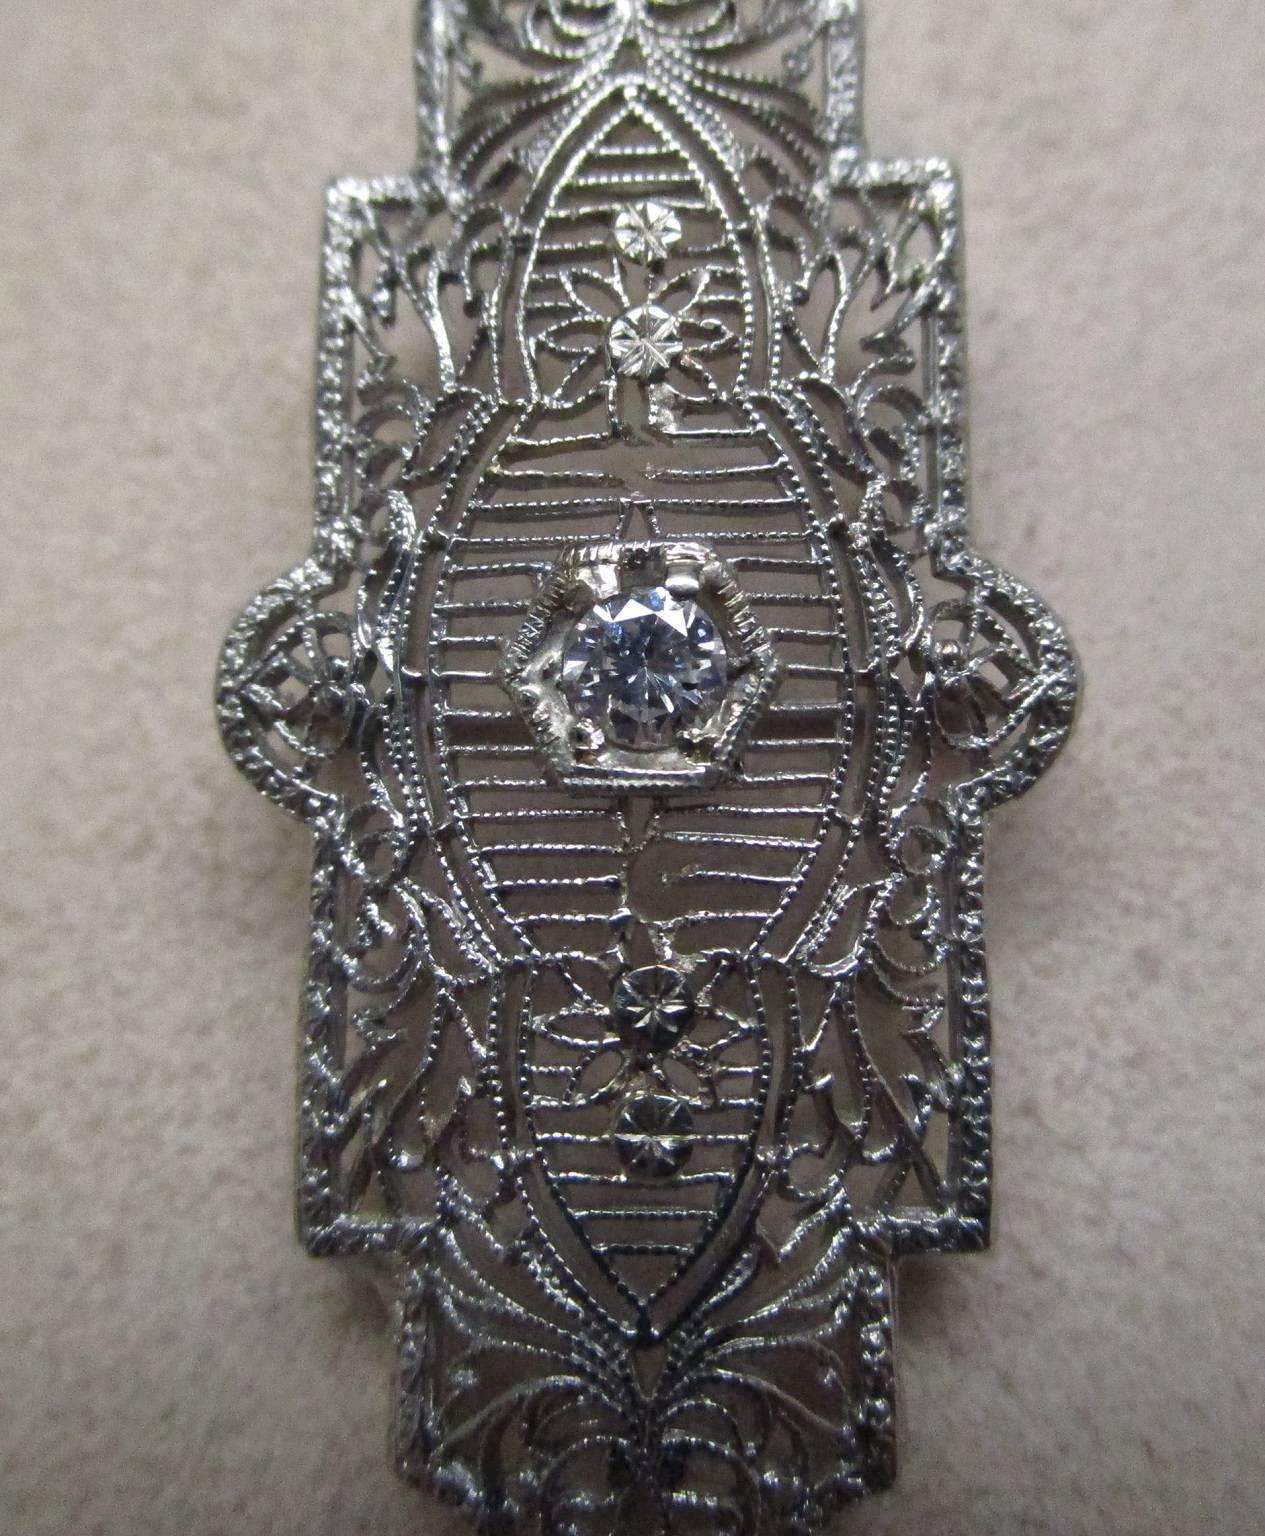 This exquisite piece is a pendant as well as a pin. The long, geometric details are exemplary qualities of the Art Deco period from which this 14 karat white gold piece originates. It has a bail that allows it to be a functioning and versatile